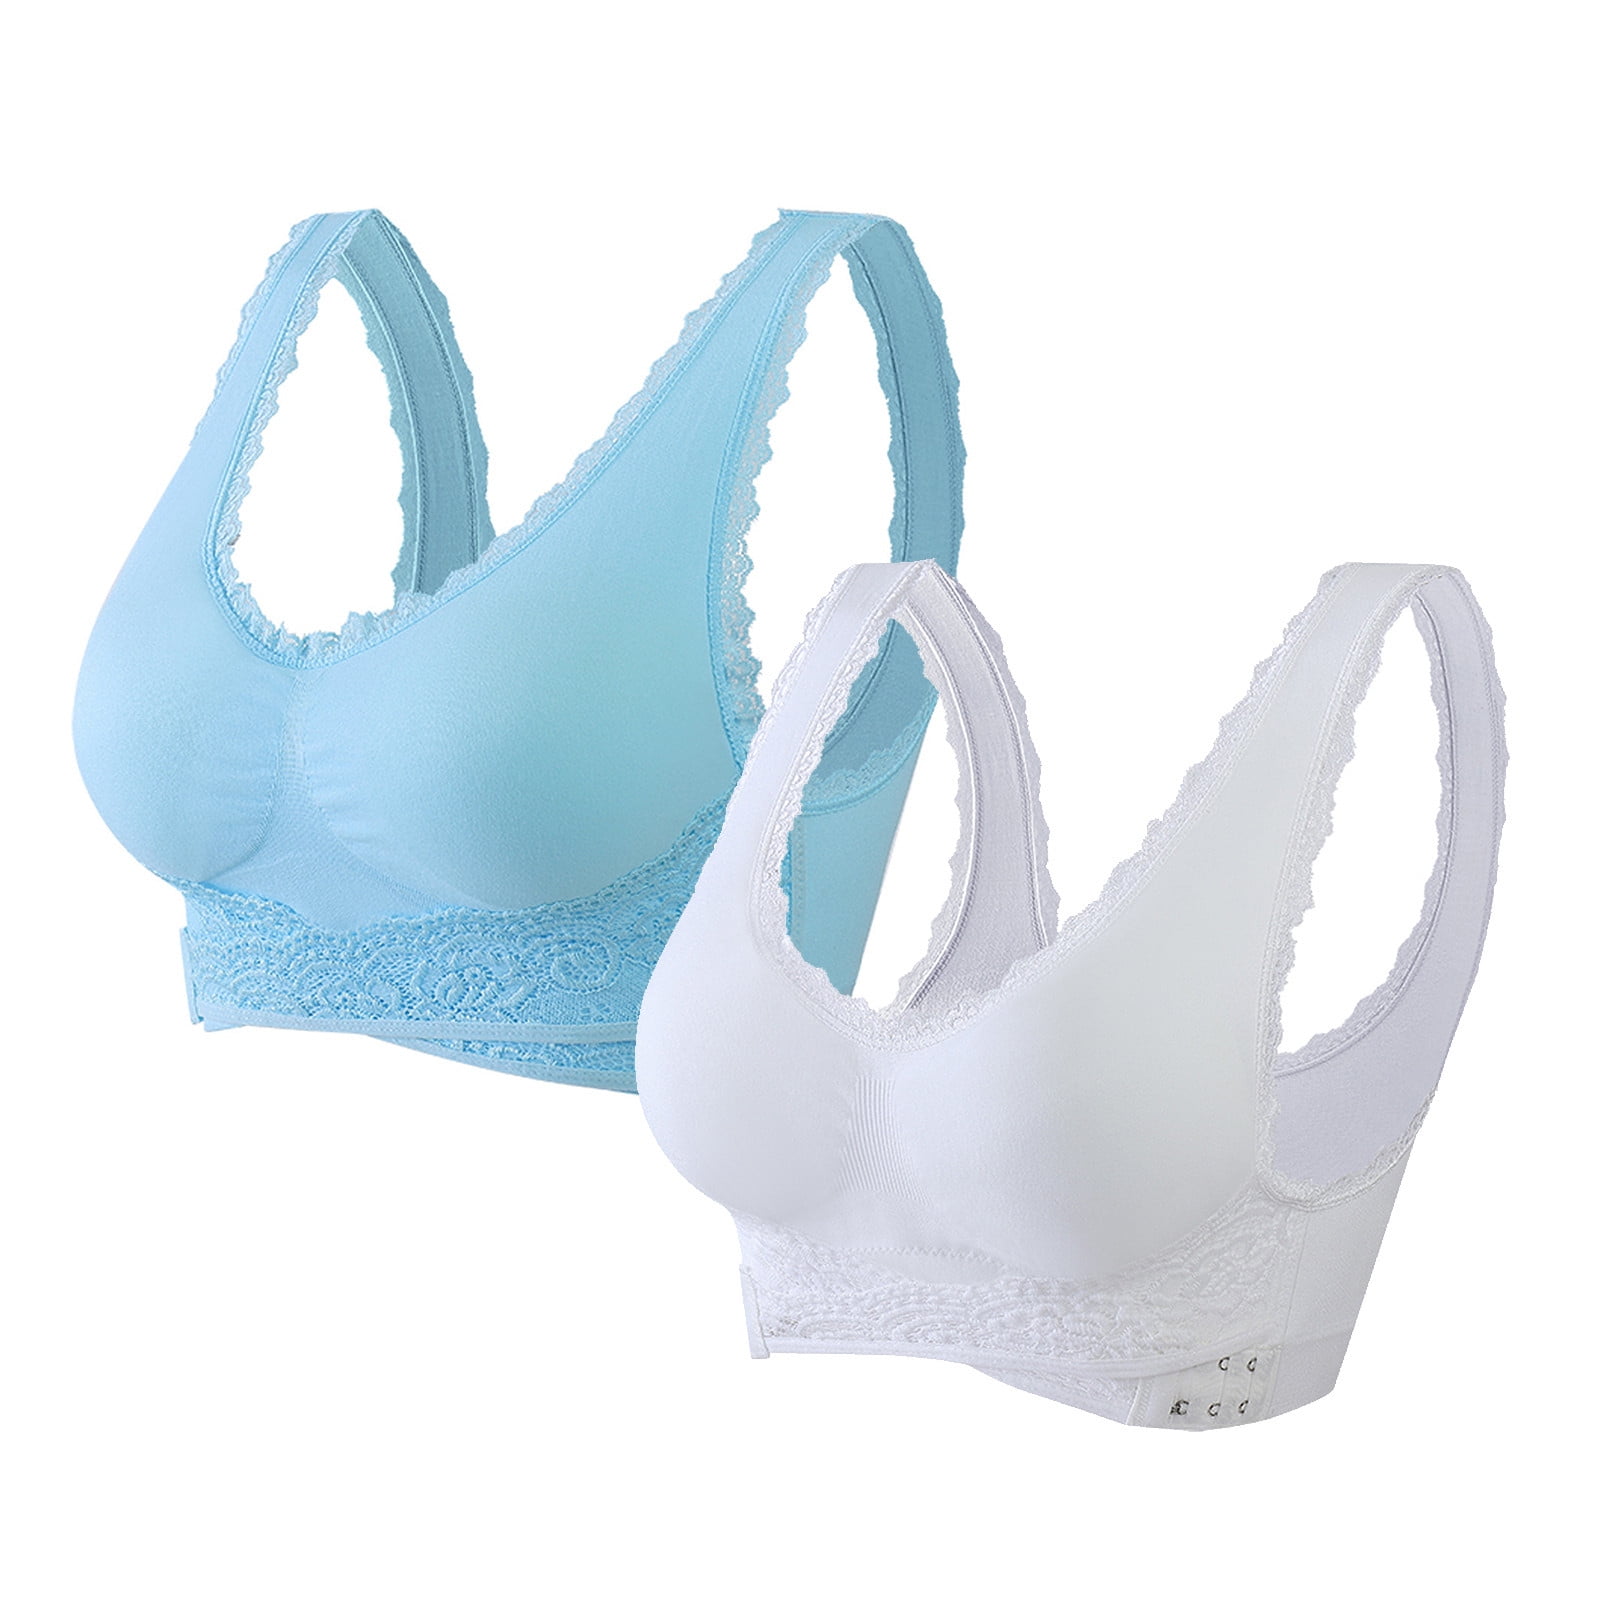 LIBRCLO 2PC Kendally Bra, Kendally Bras, Front Cross Side Buckle